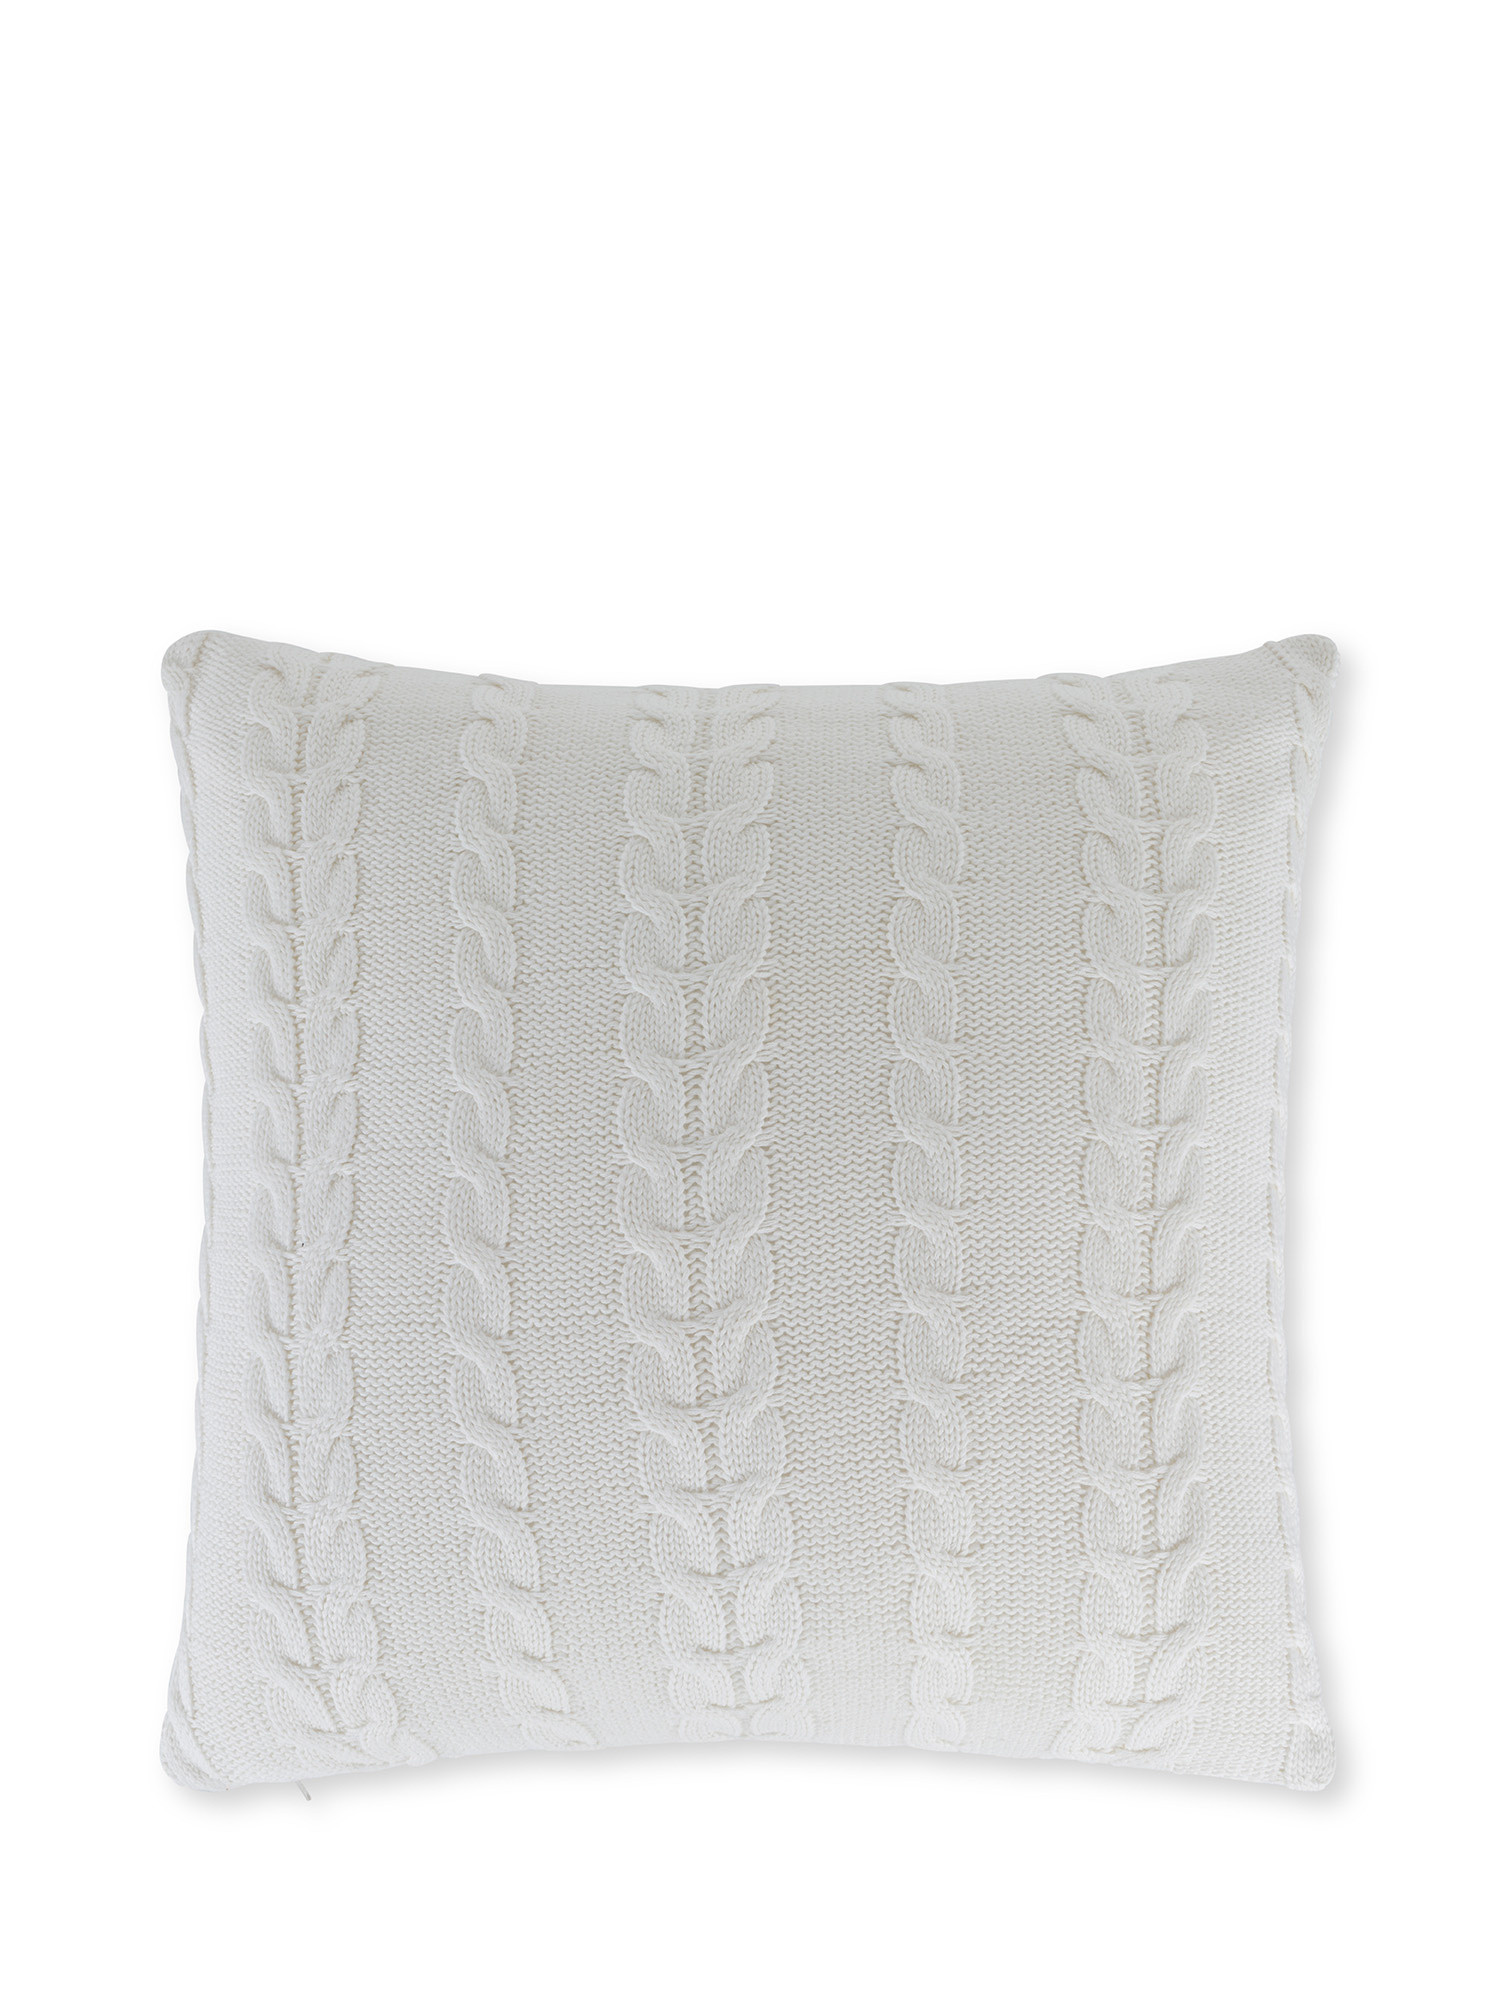 Knitted cushion with braid motif 45x45 cm, Cream, large image number 0